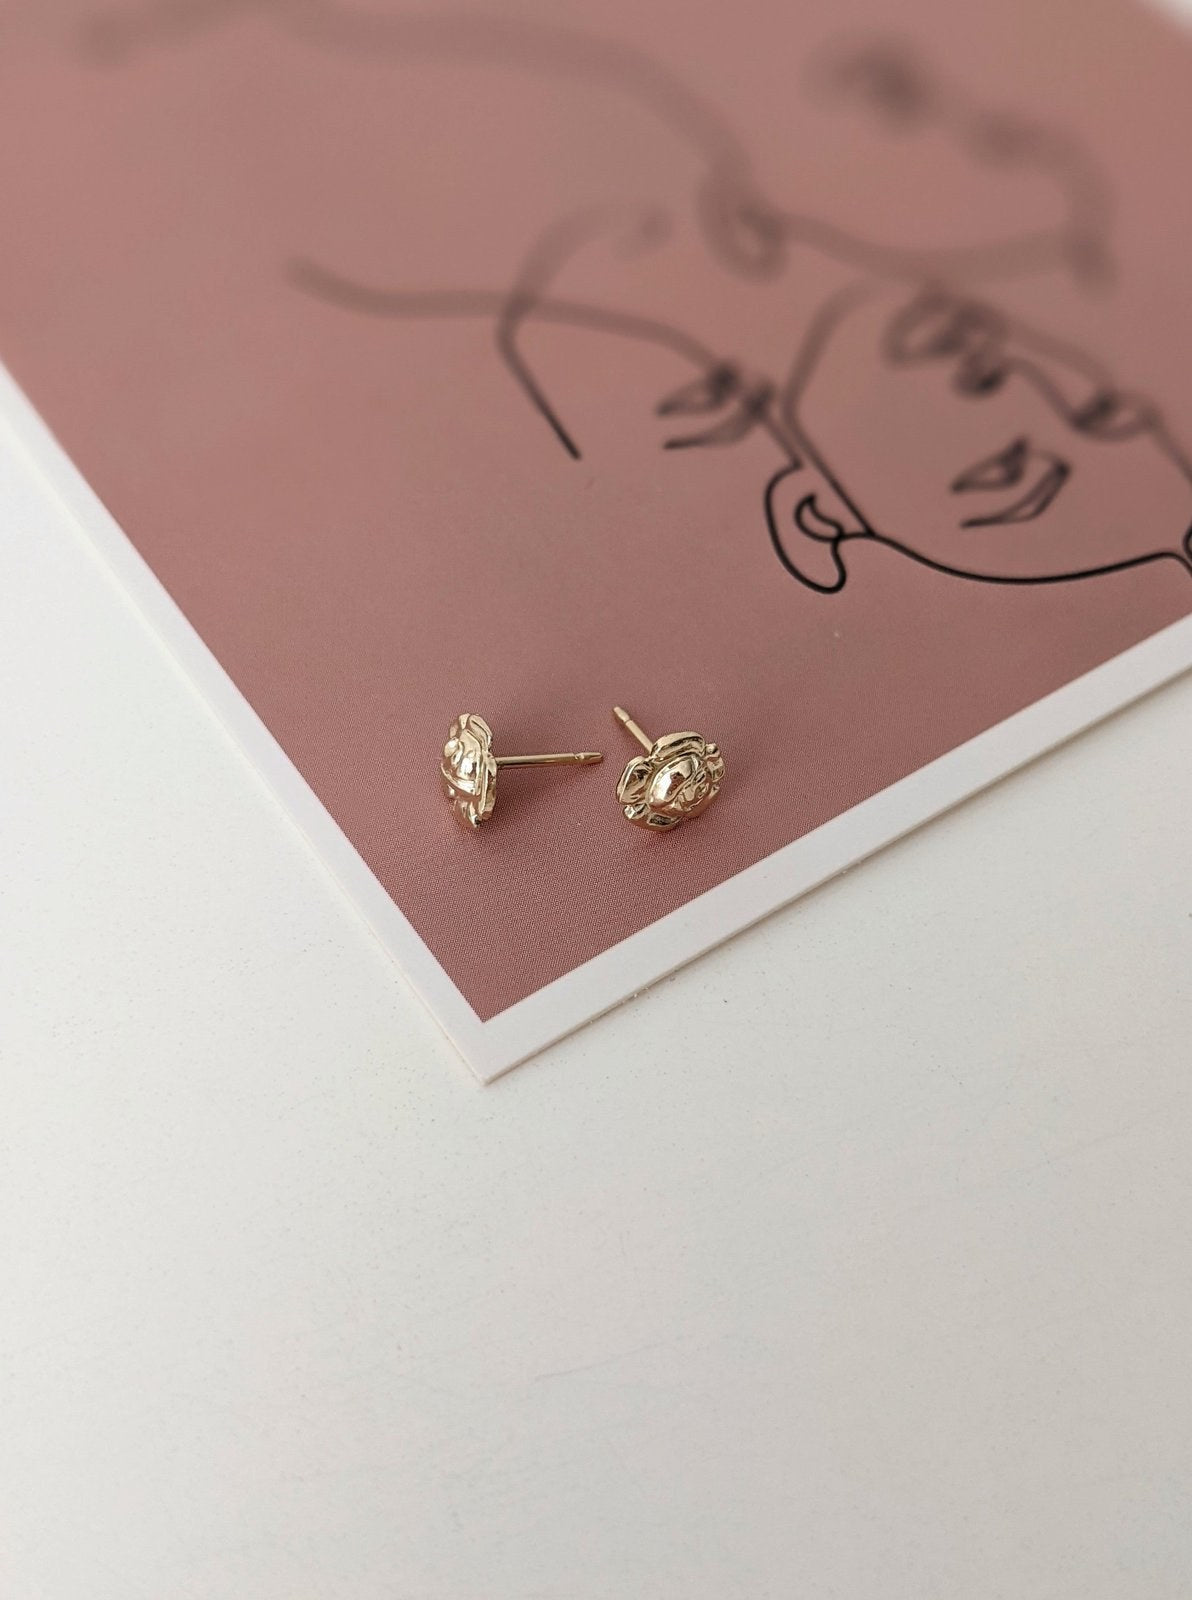 Rose Stud Earrings Layer the Love